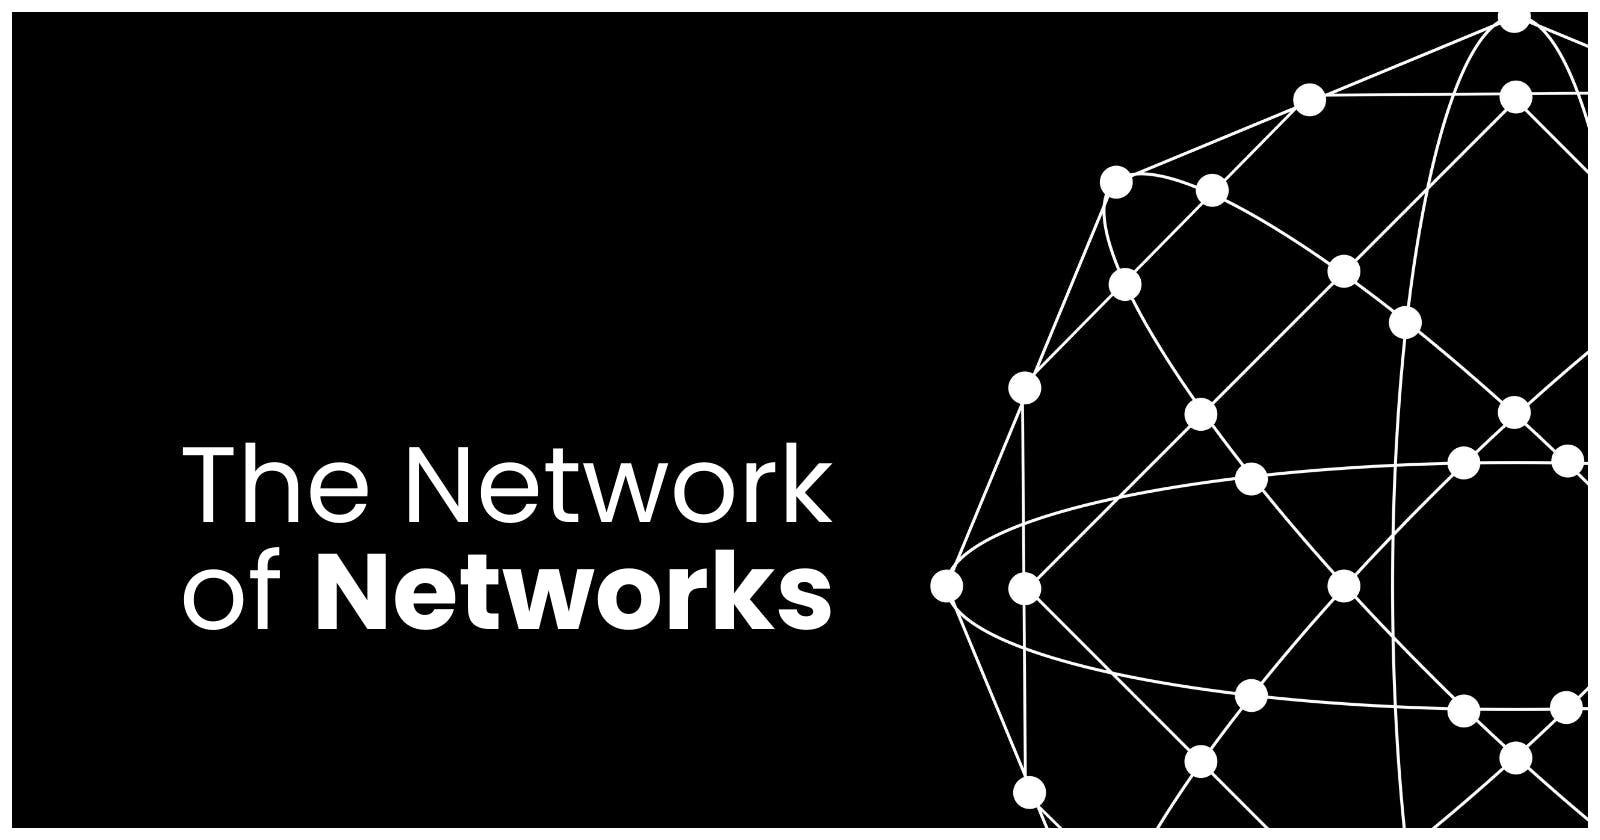 The Network of Networks